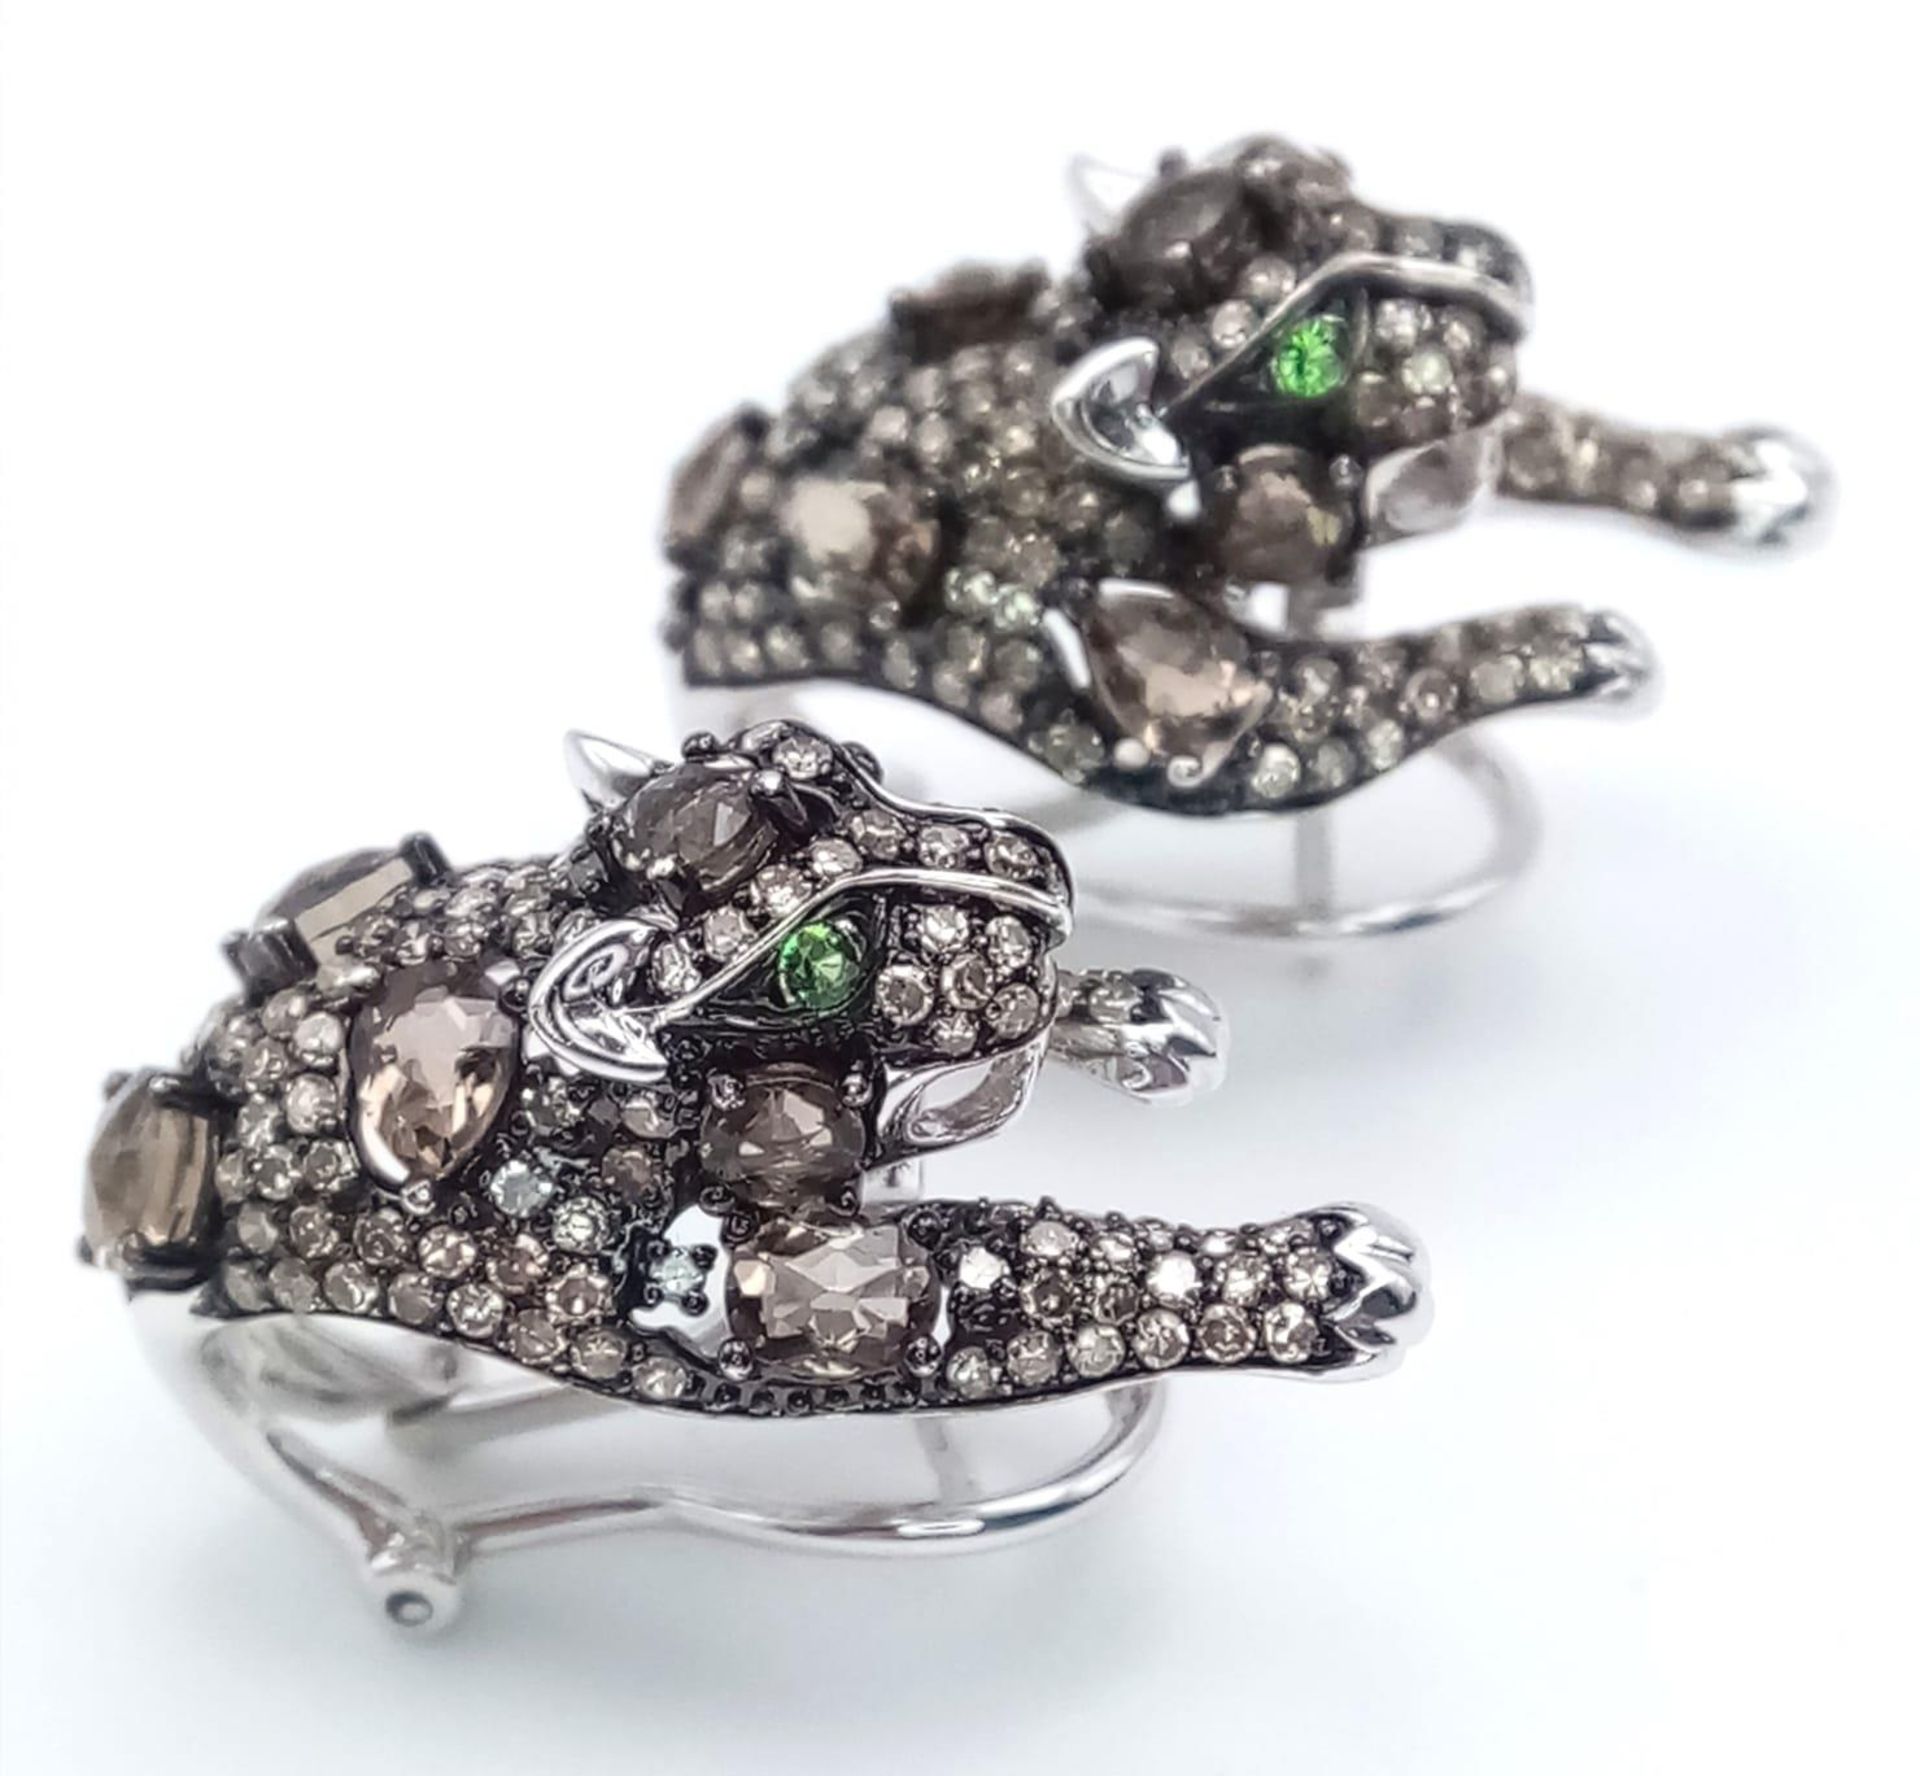 A STUNNING PAIR OF 14K WHITE GOLD DIAMOND , CHAMPAGNE DIAMONDS AND EMERALD PANTHER EARRINGS. 10.5gms - Image 3 of 8